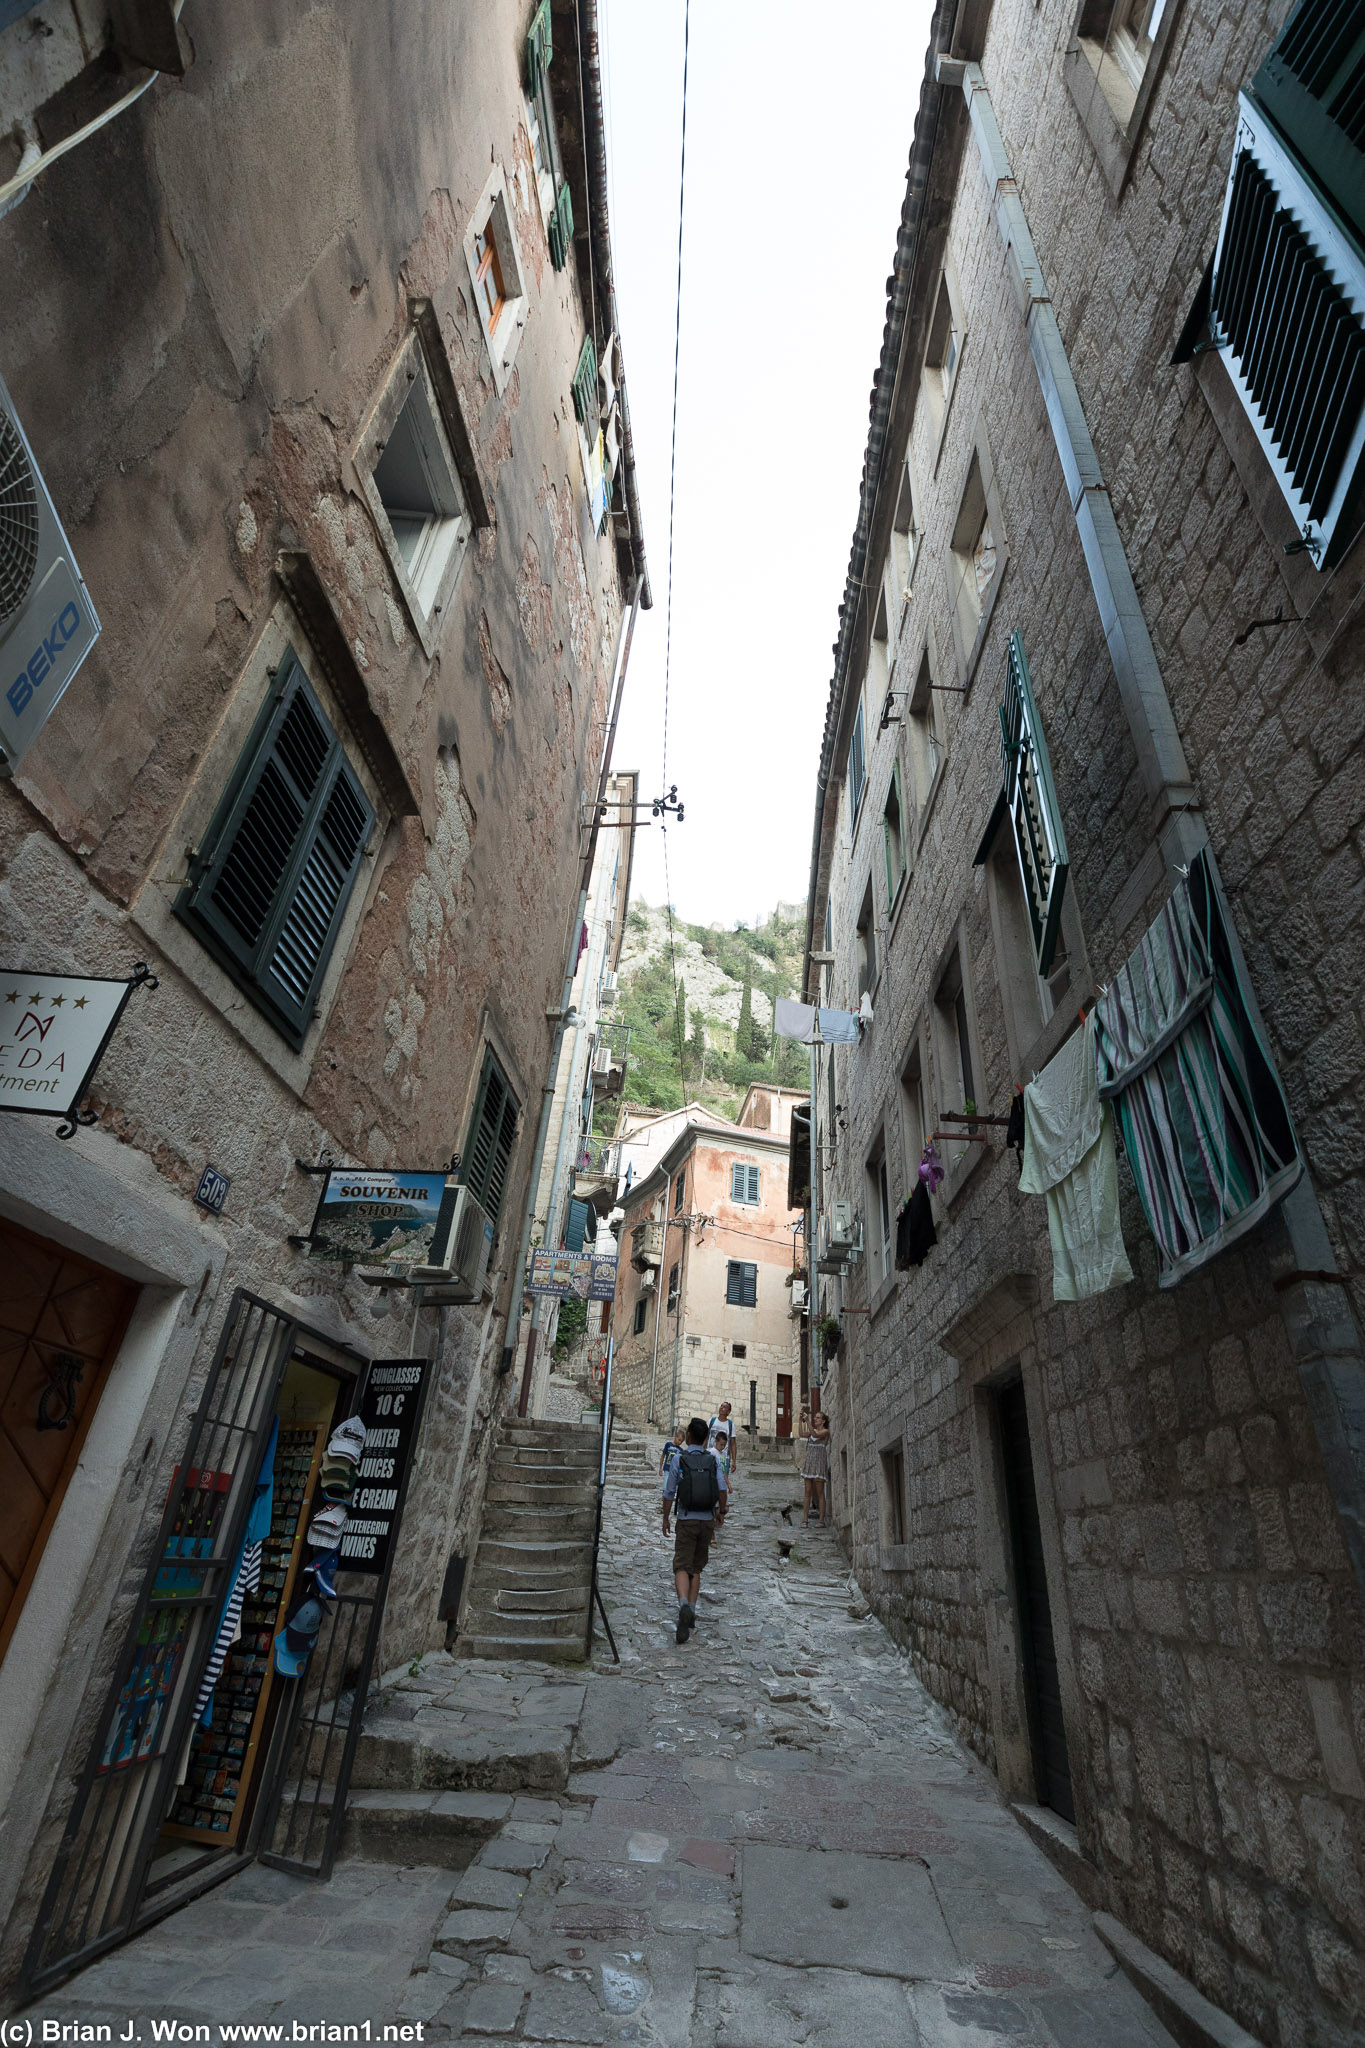 Narrow streets of old town.